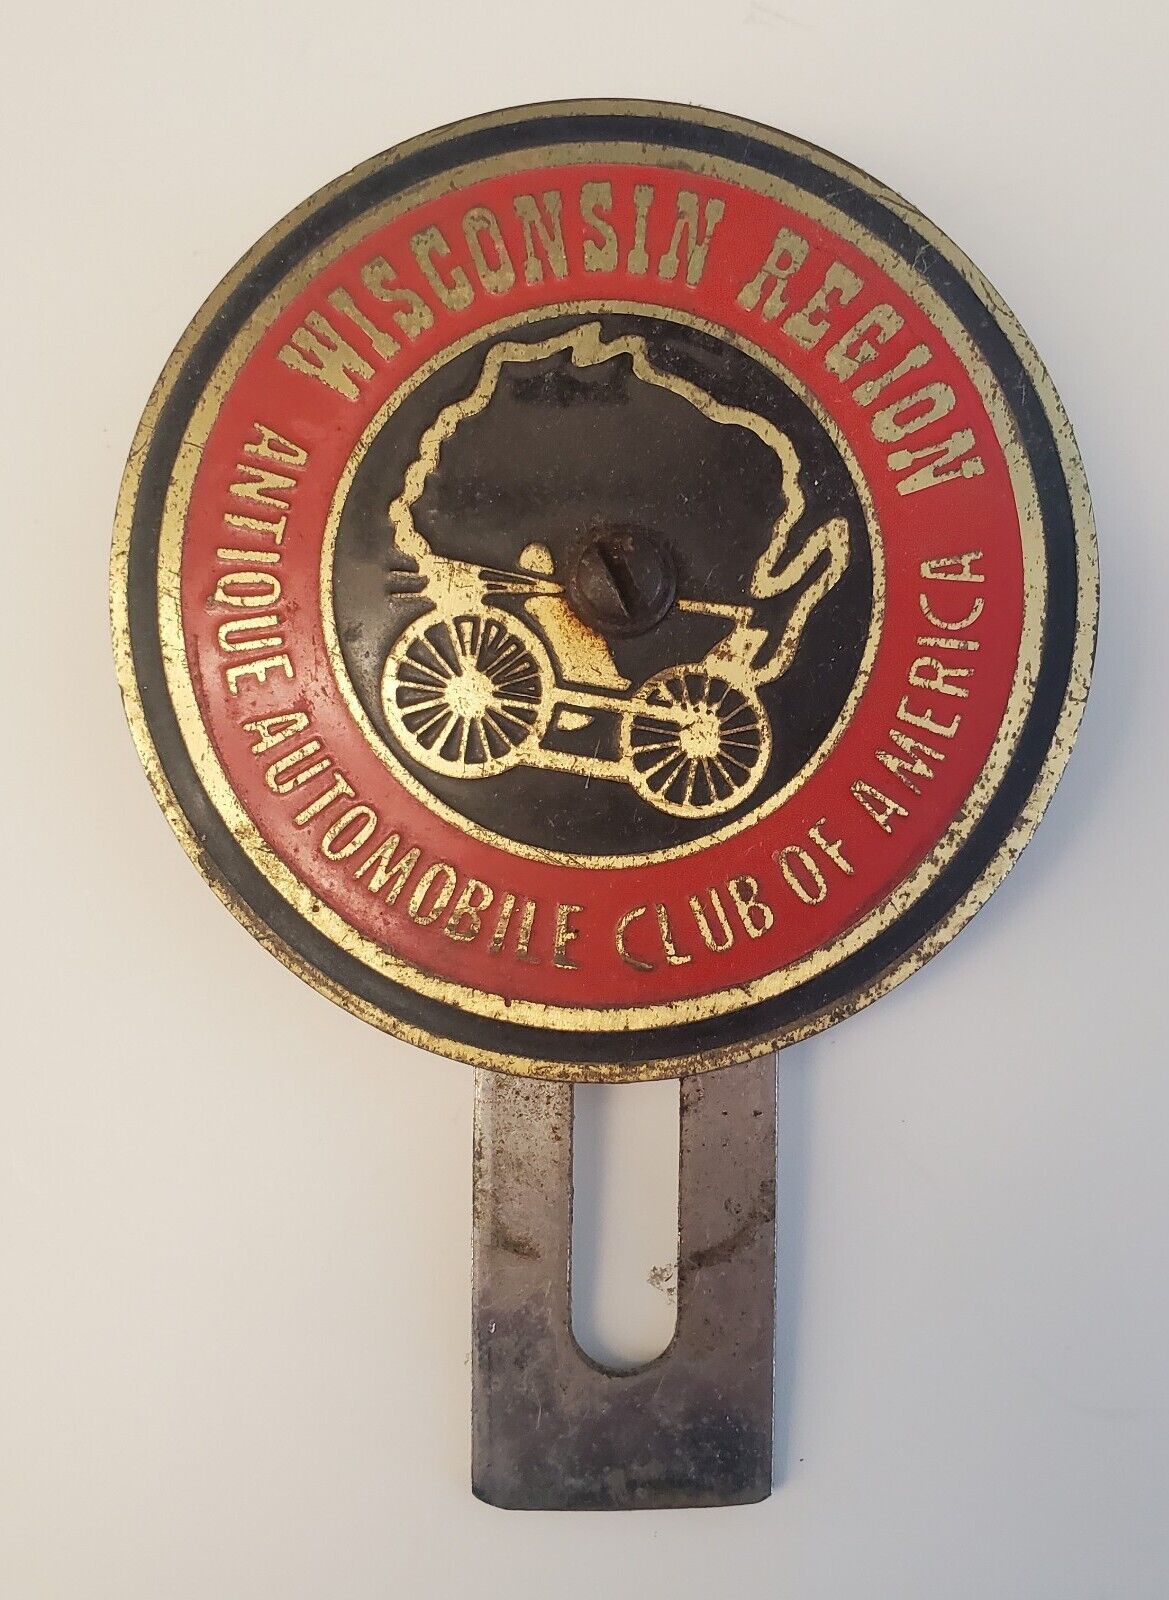 Vintage Antique Automobile Club of America Wisconsin Region License Plate Topper